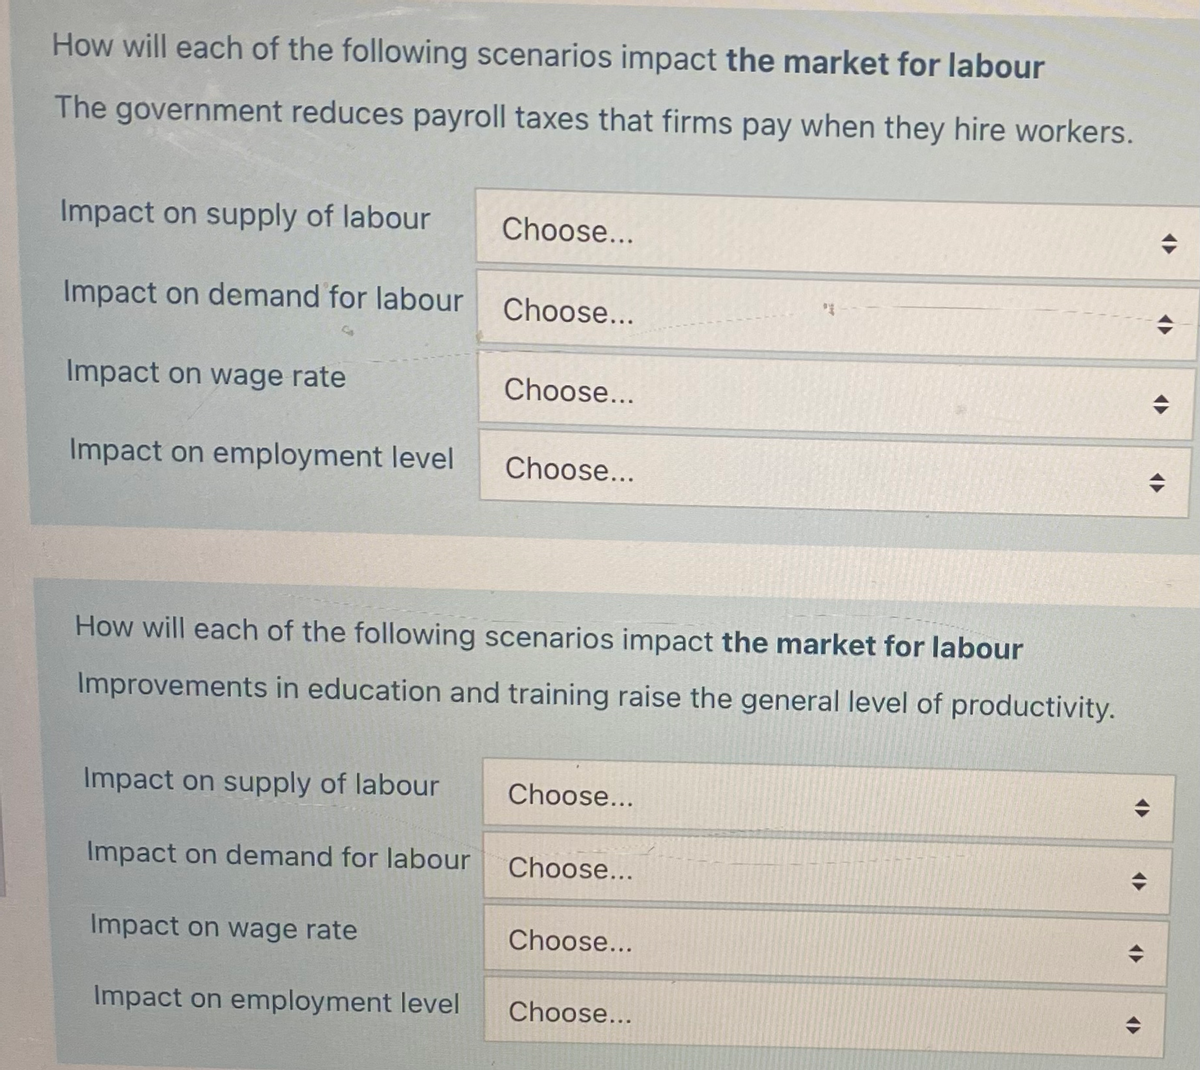 How will each of the following scenarios impact the market for labour
The government reduces payroll taxes that firms pay when they hire workers.
Impact on supply of labour
Impact on demand for labour
Impact on wage rate
Impact on employment level
Impact on supply of labour
Impact on demand for labour
Choose...
Impact on wage rate
Impact on employment level
Choose...
How will each of the following scenarios impact the market for labour
Improvements in education and training raise the general level of productivity.
Choose...
Choose...
Choose...
Choose...
Choose...
Choose...
A
<
<
<>
◆